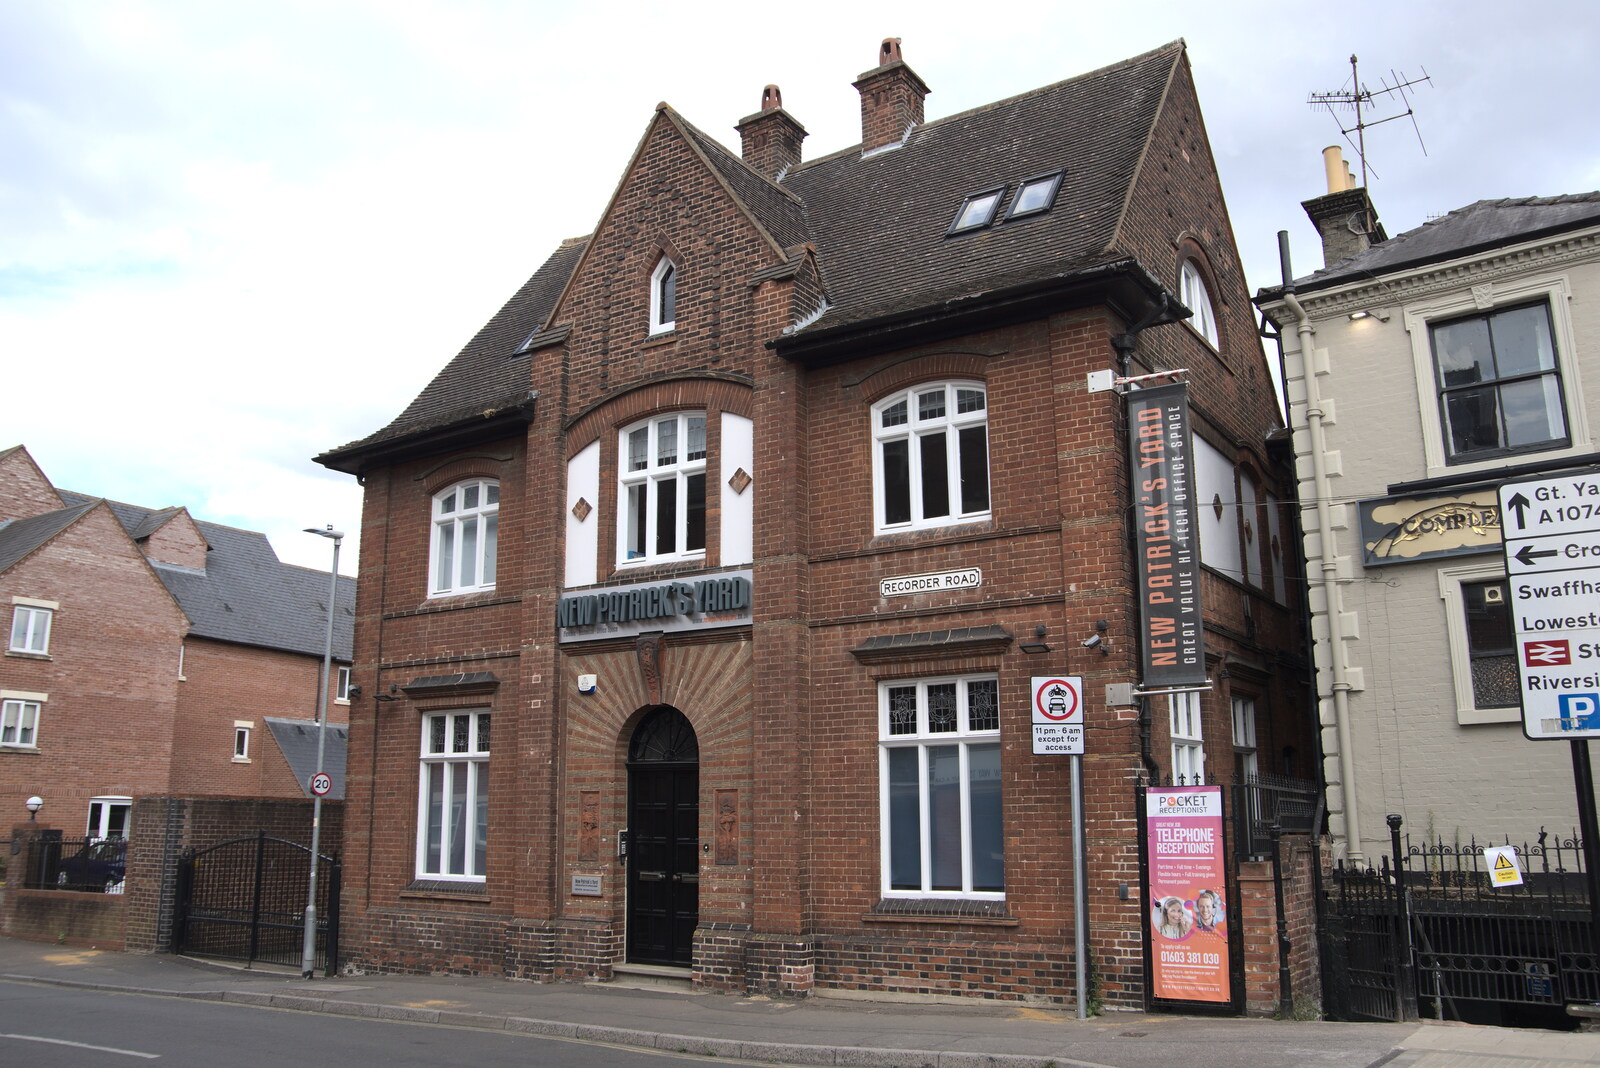 A July Miscellany, Diss, Eye and Norwich - 23rd July 2022: Interesting 1910-ish building on Recorder Road